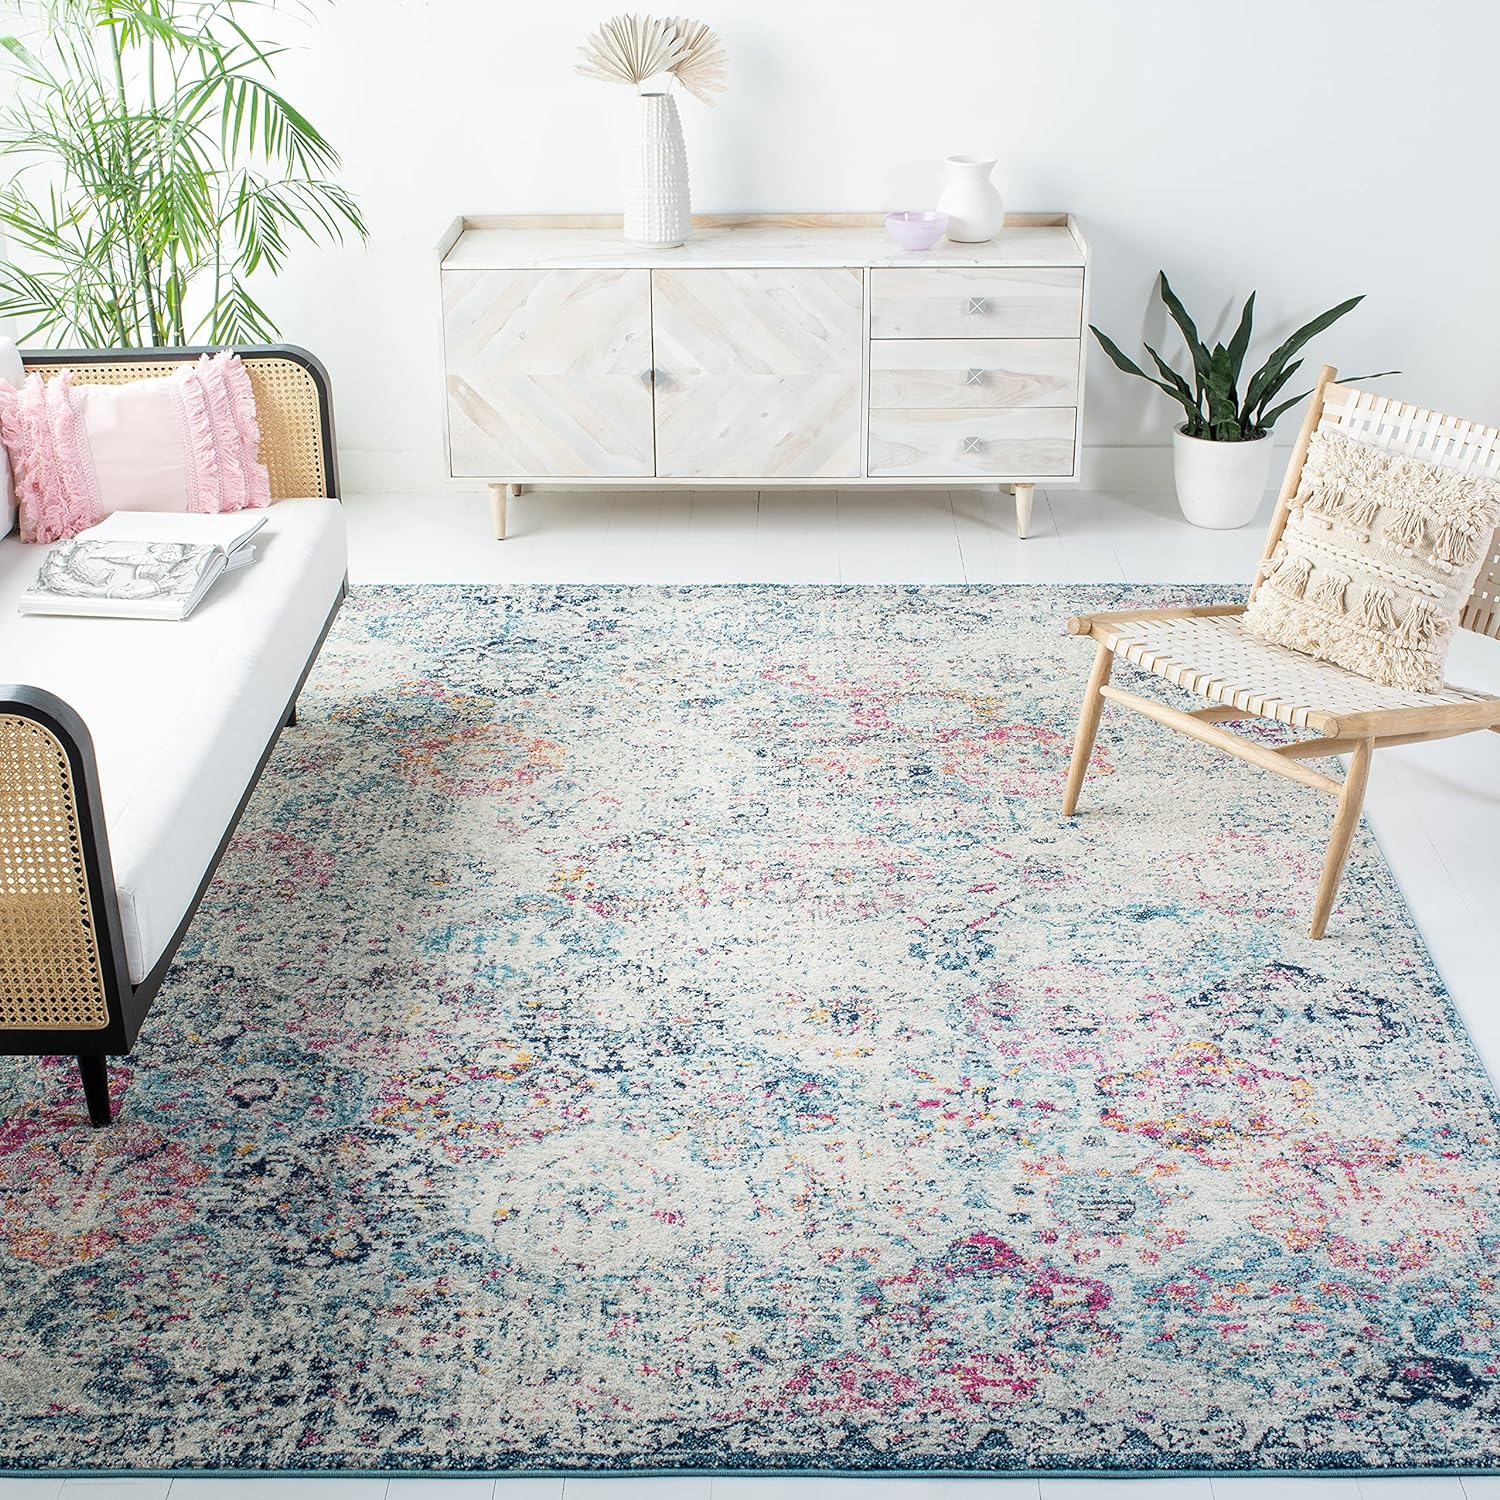 Was hesitant to purchase a rug sight unseen, but I decided to after reading so many great reviews. Its beautiful! Im still grabbing and setting up furniture, but attaching pics for others to see. I do not notice an odor, and the rug flattened out pretty quickly. For reference, I chose the navy/teal in the 5x7. It has pops of pink and yellow, but are muted enough to not be overpowering - just pretty.